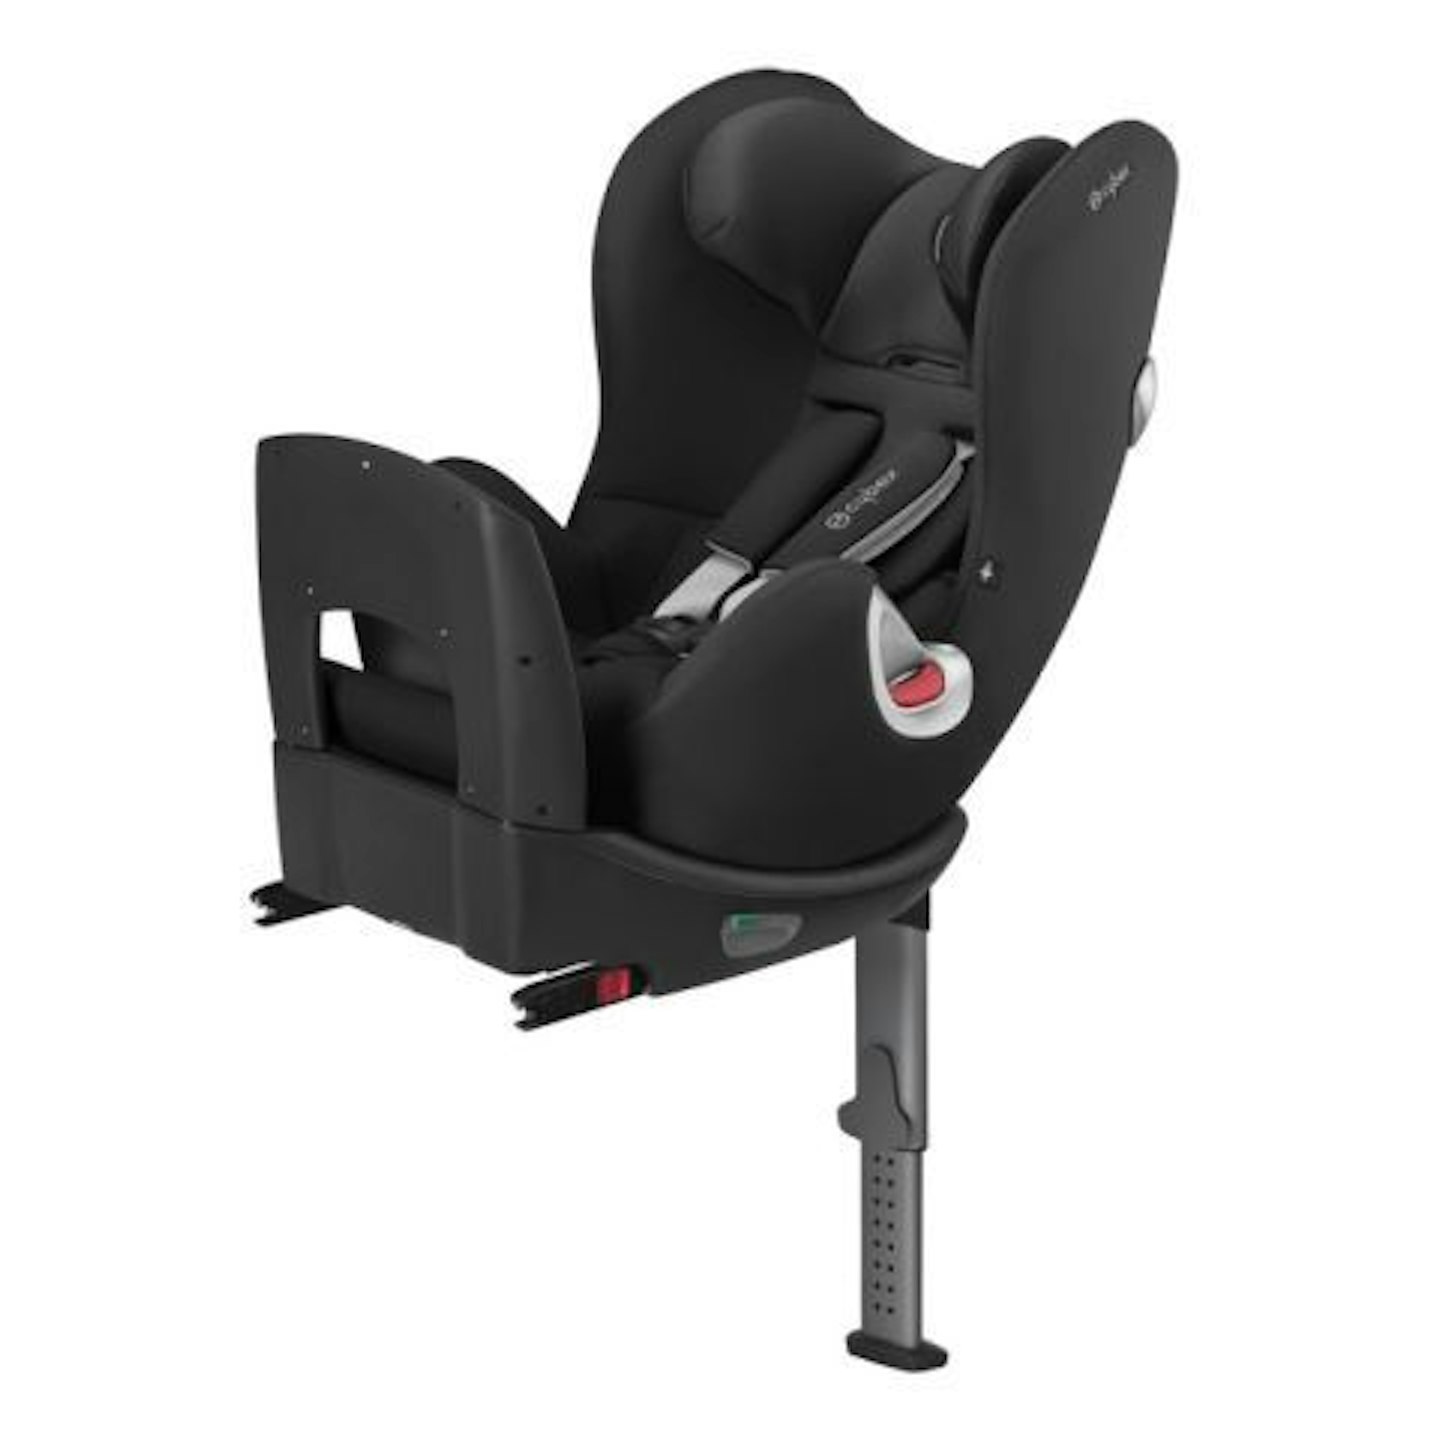 https://images.bauerhosting.com/affiliates/sites/12/motherandbaby/legacy/root/cybex-sirona-group-0-1-car-seat-in-black-beauty-1.jpg?ar=16%3A9&fit=crop&crop=top&auto=format&w=1440&q=80